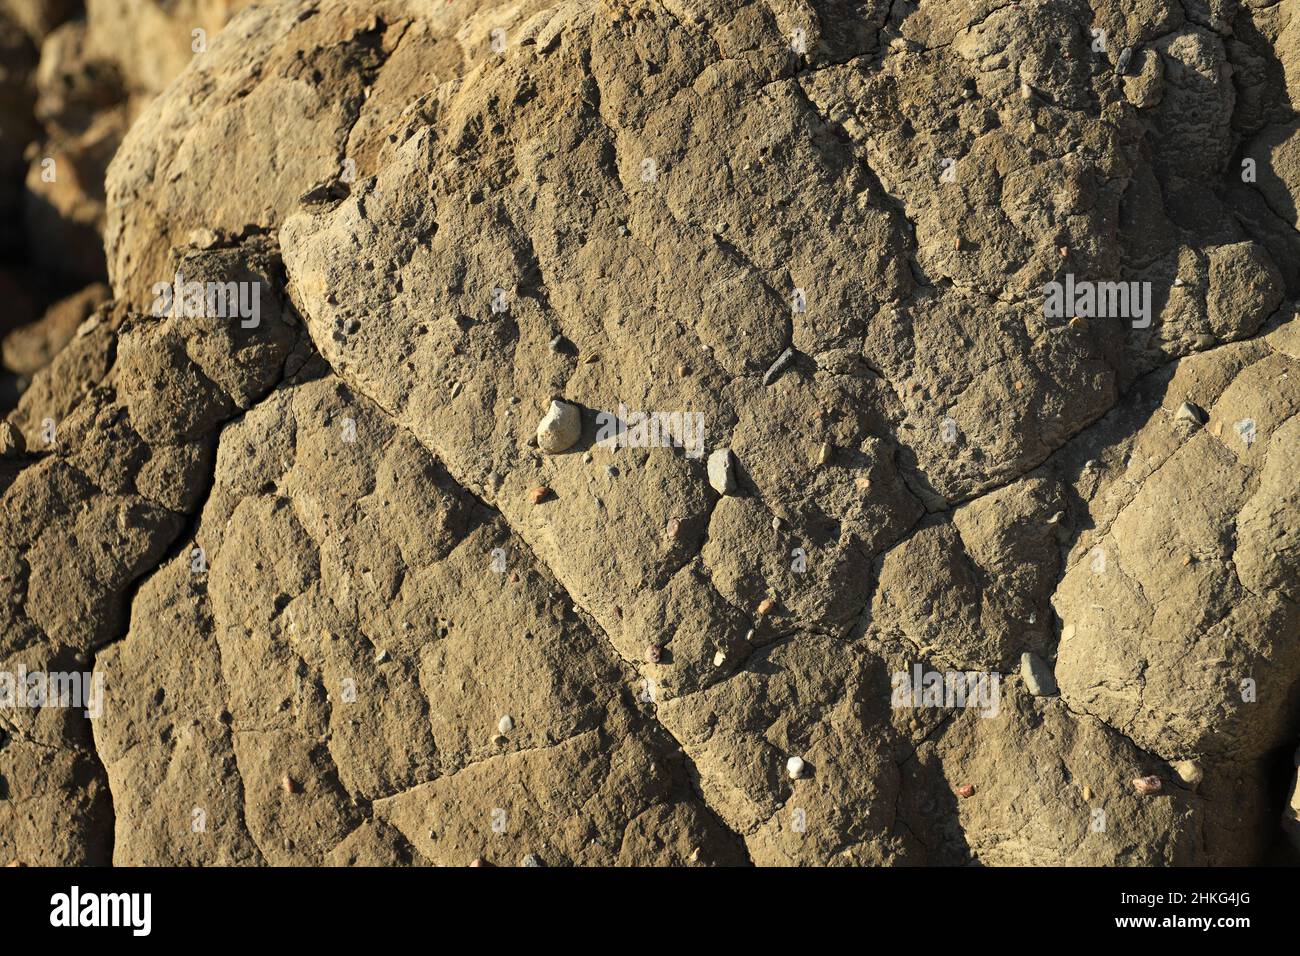 Clay Soil with Pebbles and Cracks Stock Photo